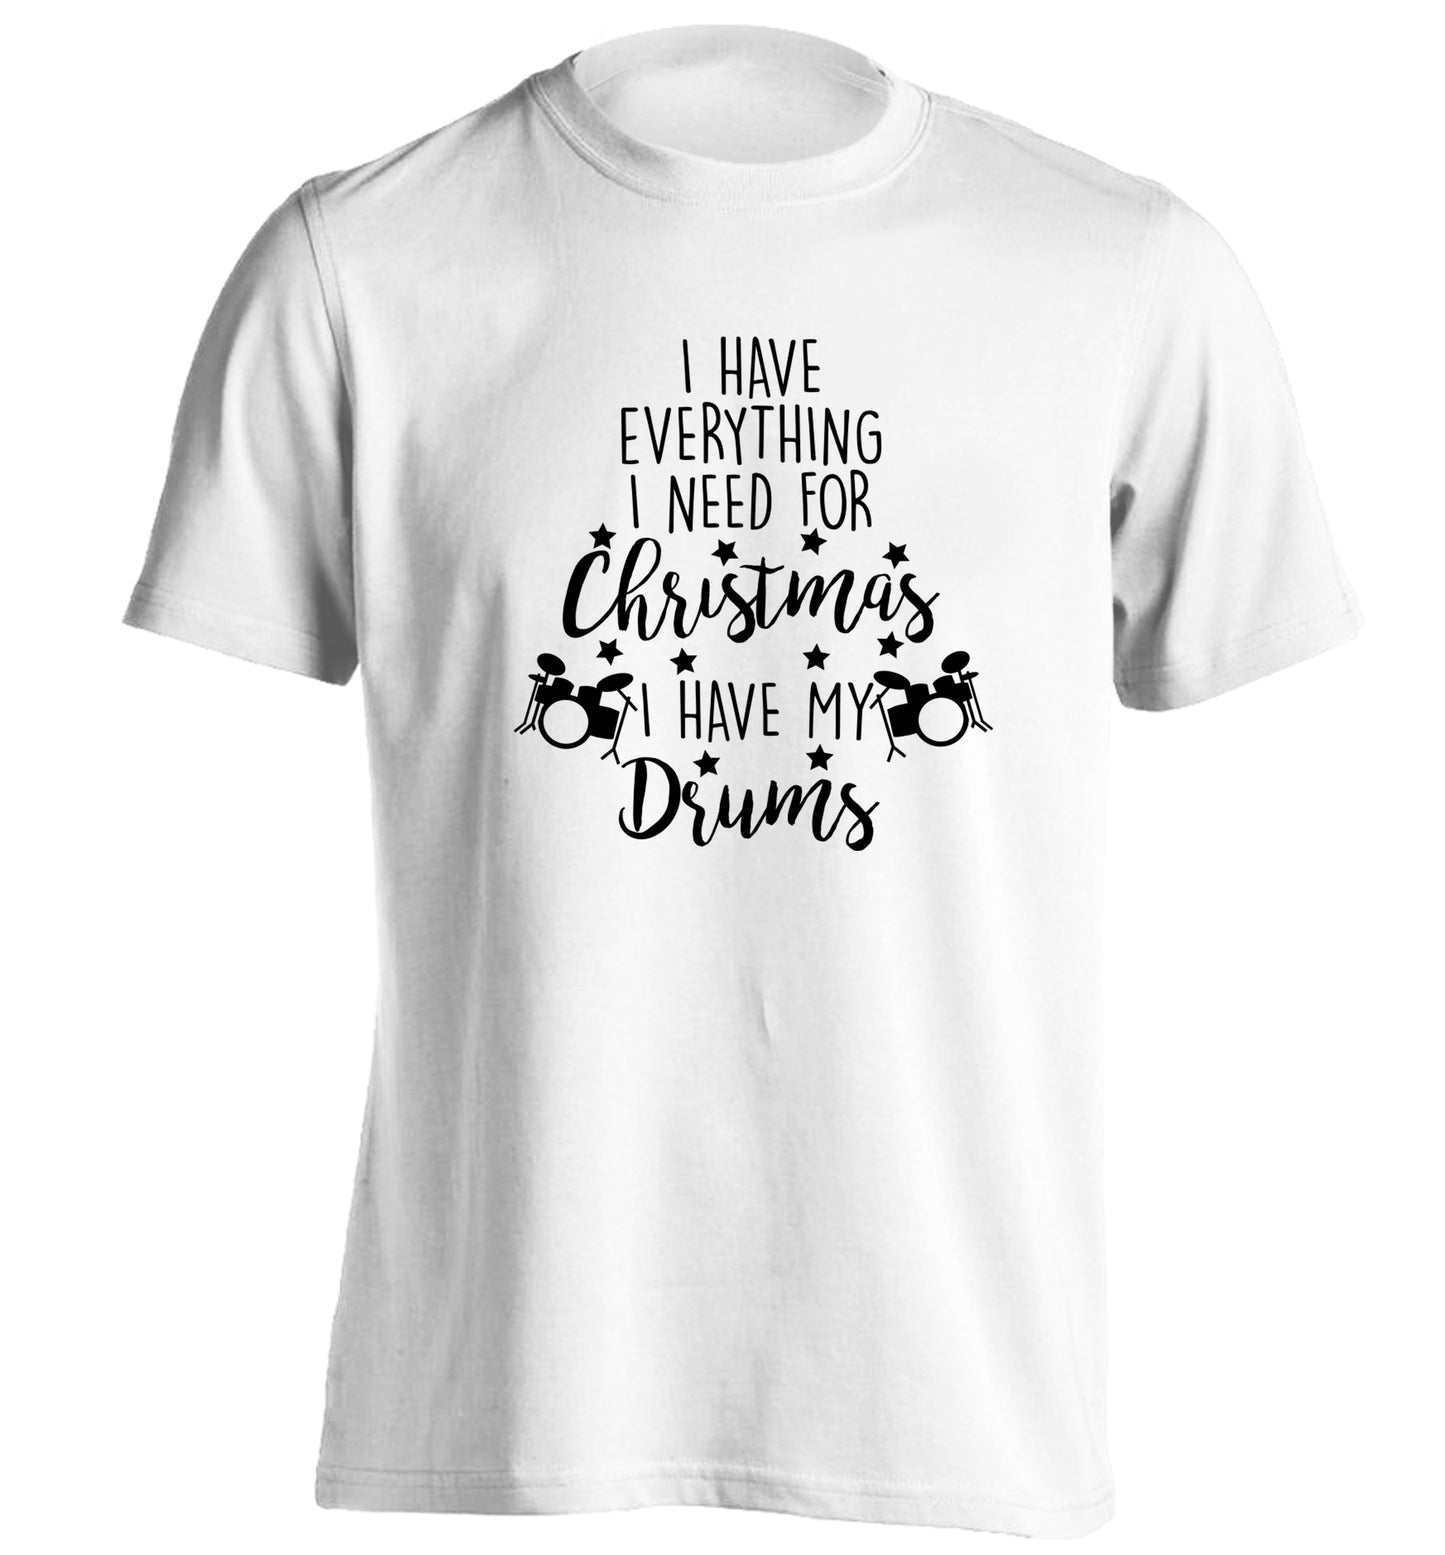 I have everything I need for Christmas I have my drums! adults unisex white Tshirt 2XL